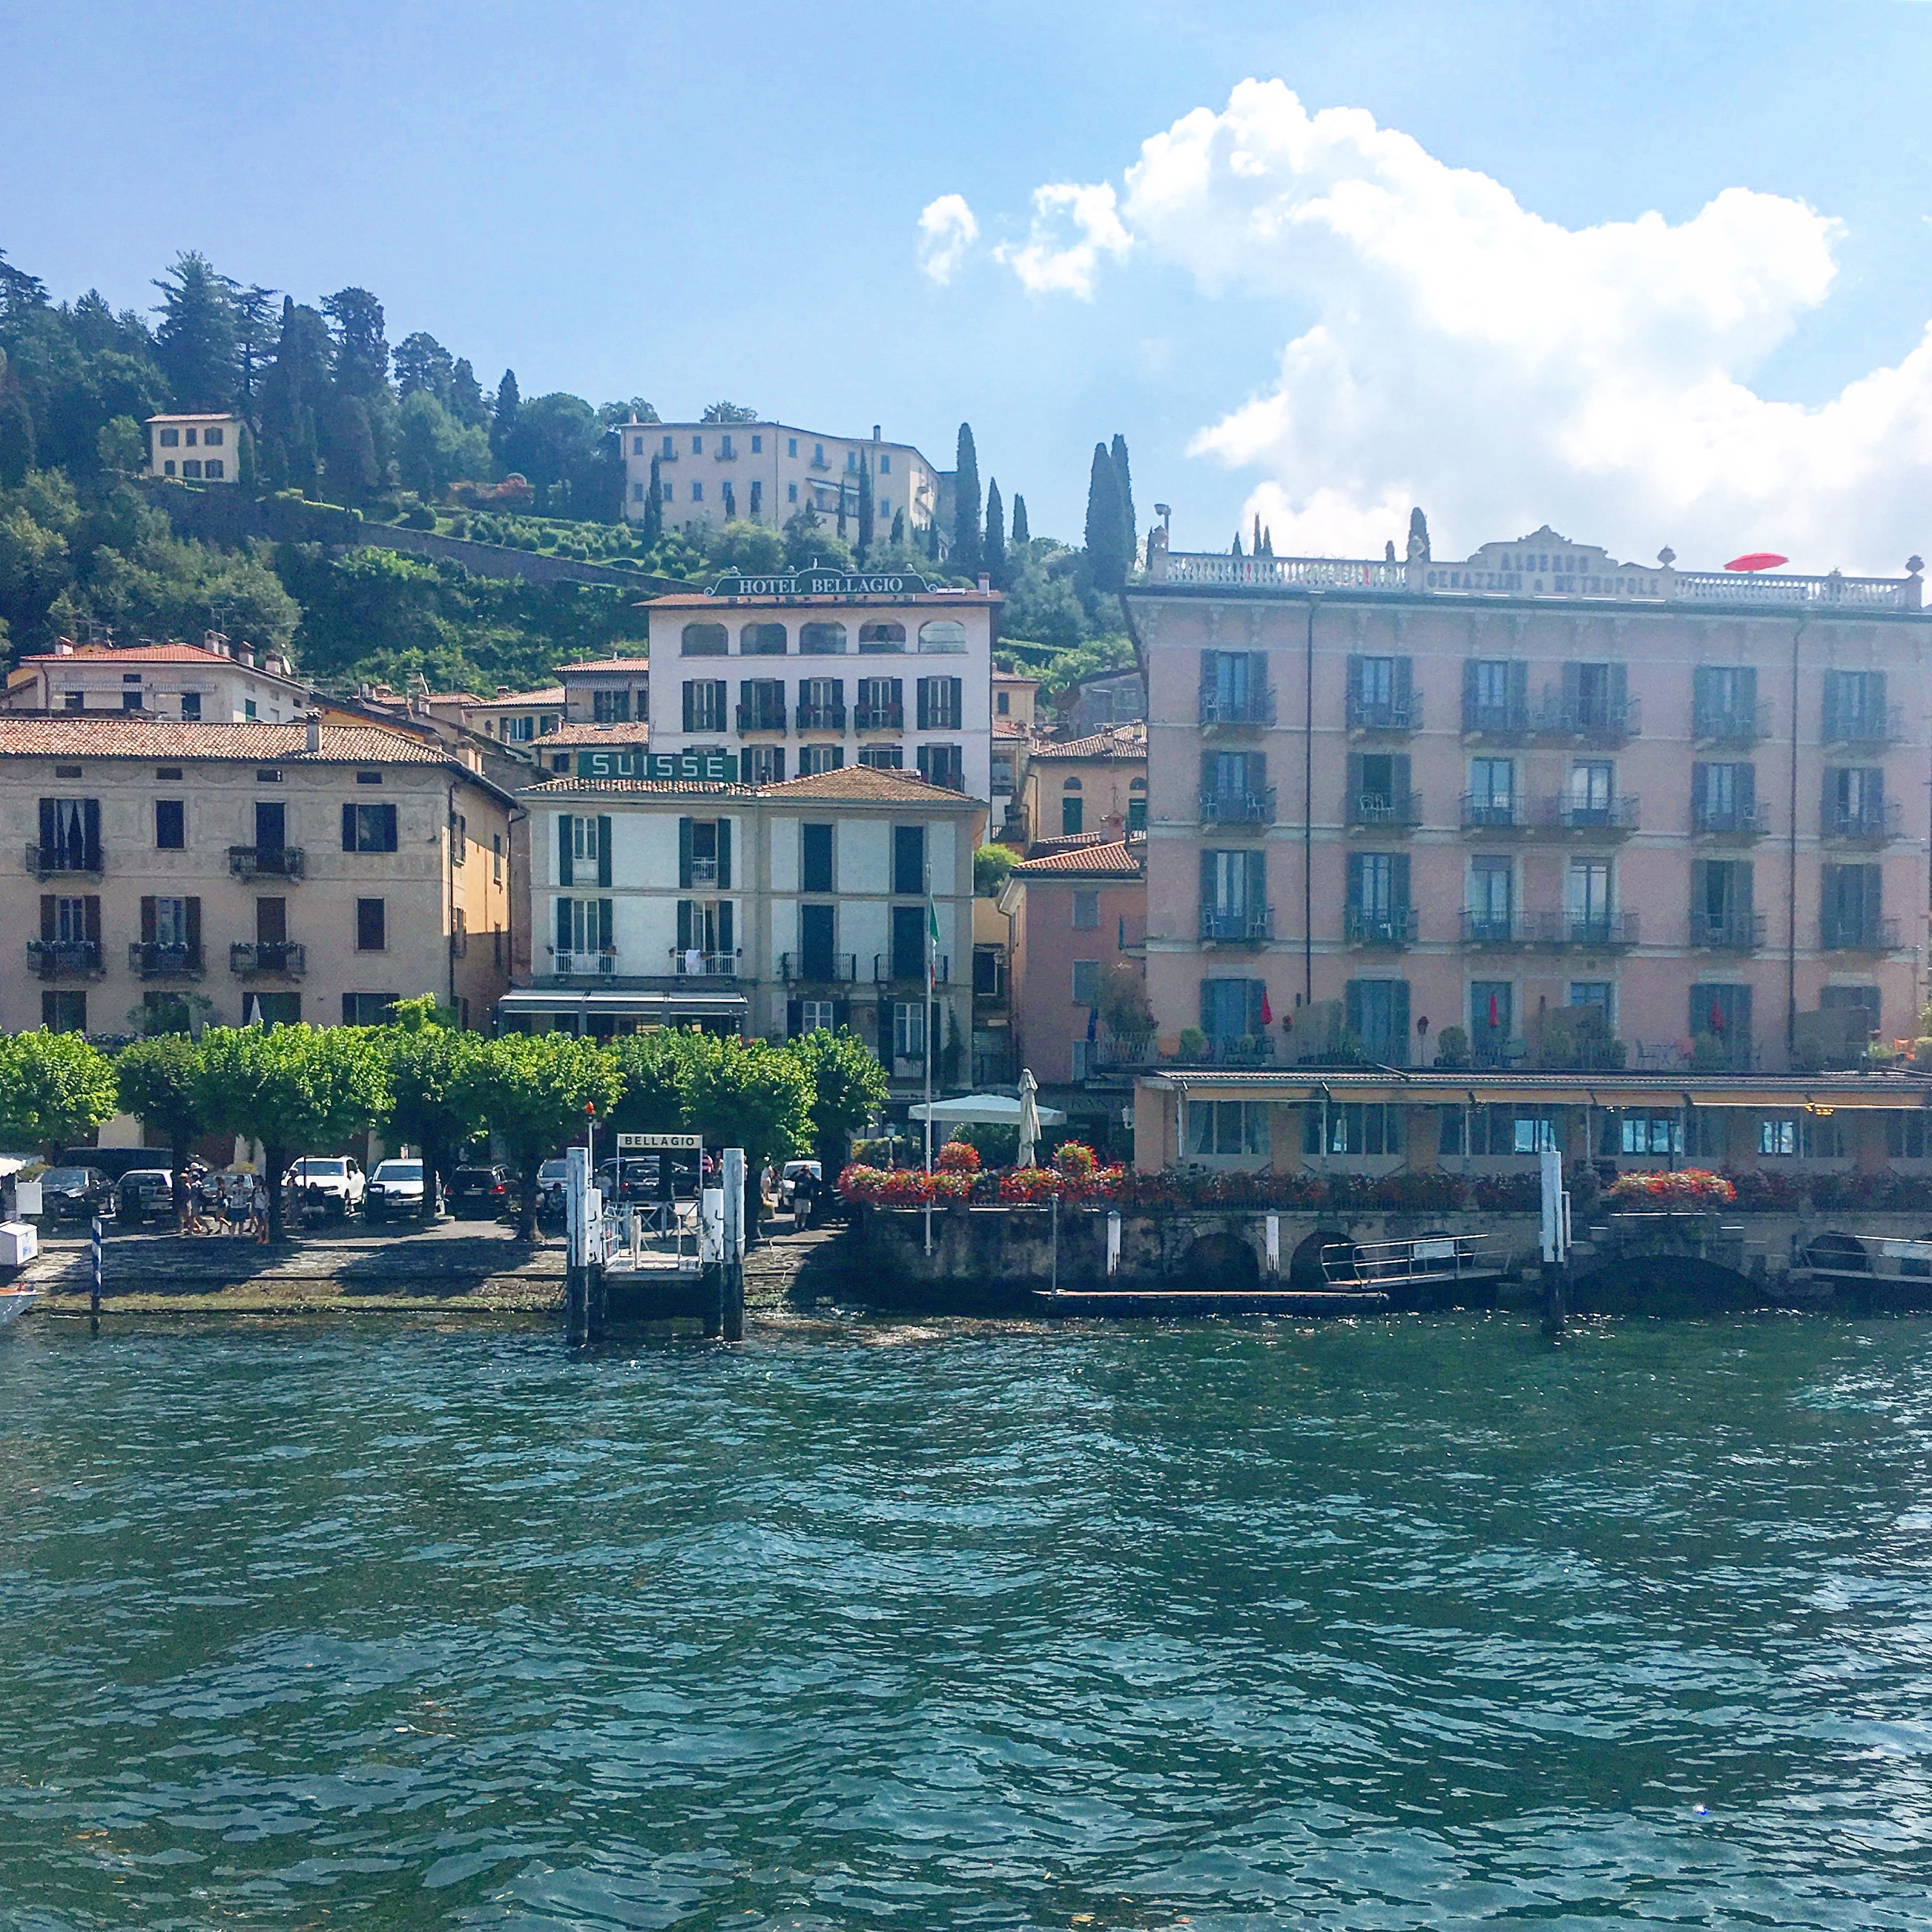 Views of Bellagio from the ferry